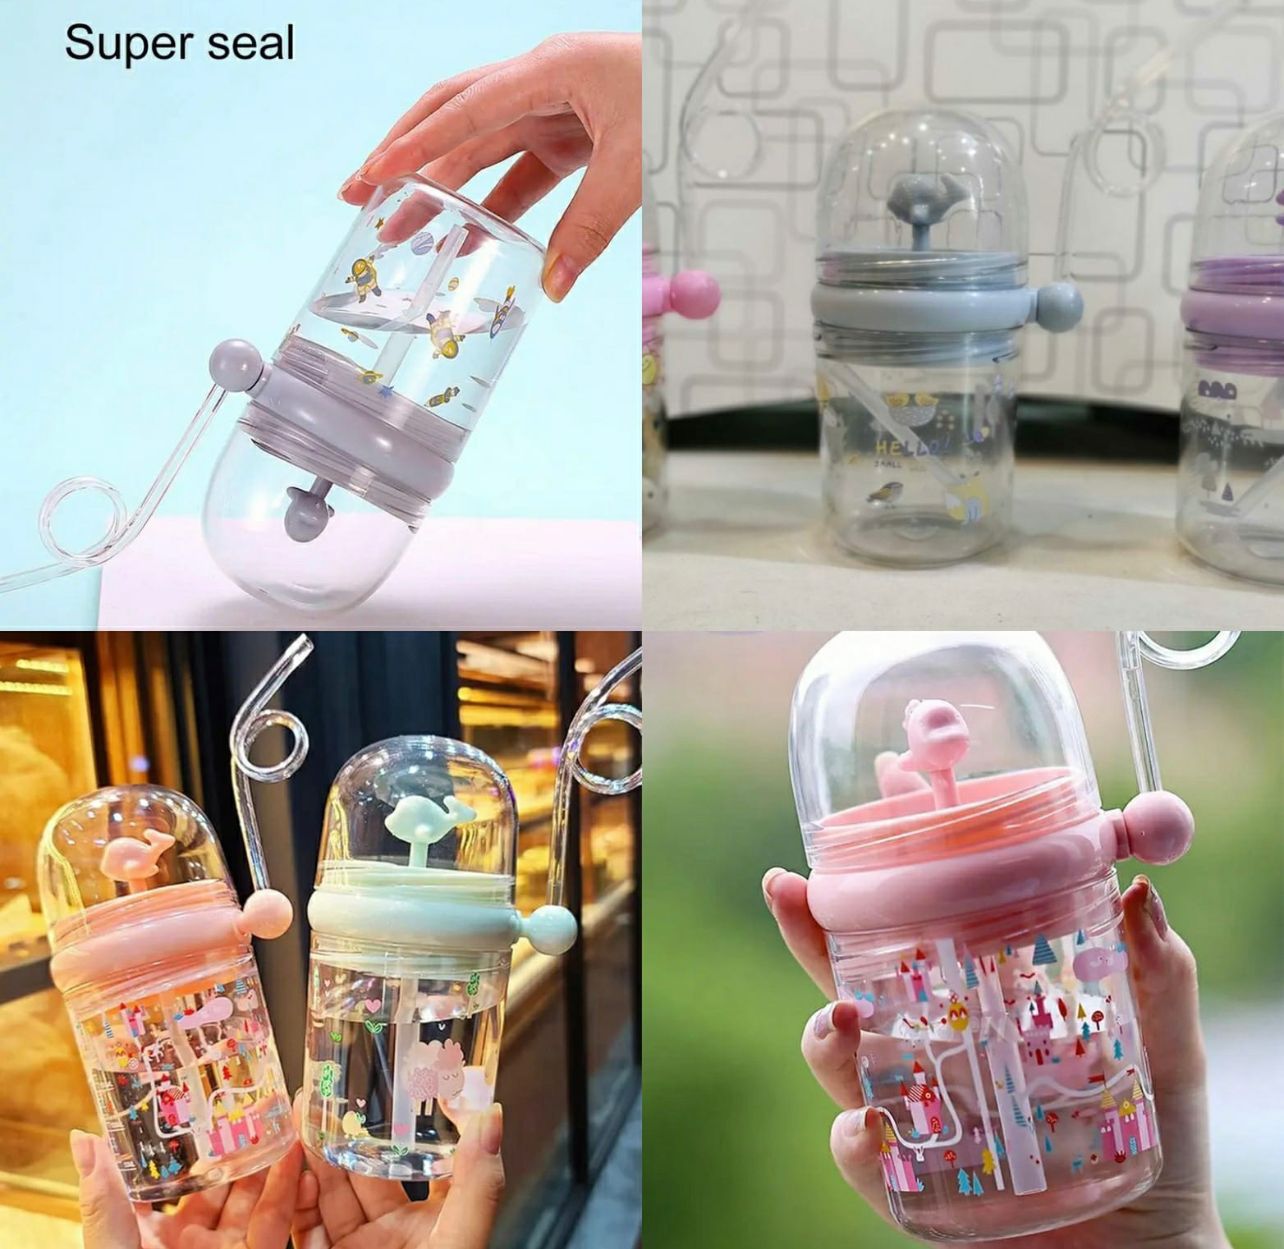 Children Whale Spray Cup (sippy bottle)